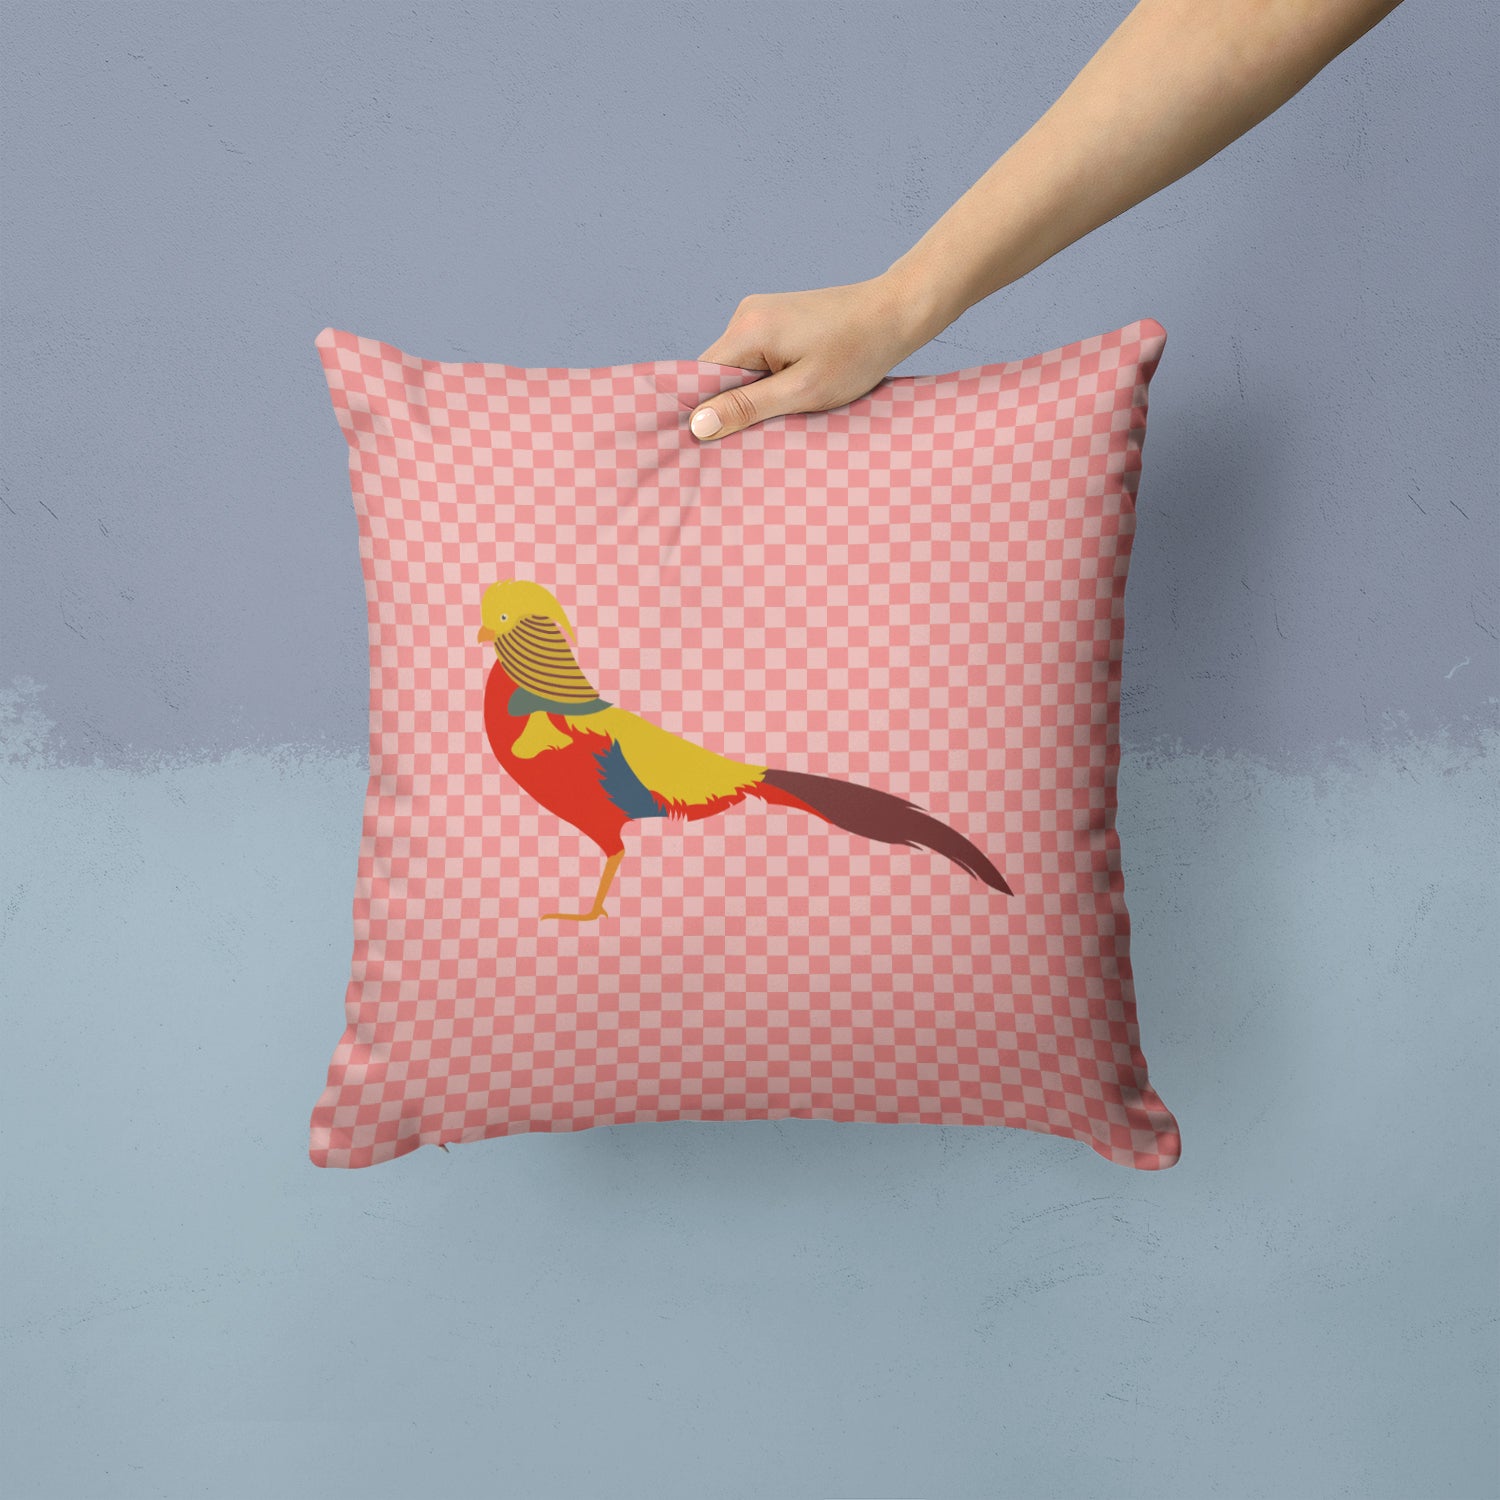 Golden or Chinese Pheasant Pink Check Fabric Decorative Pillow BB7928PW1414 - the-store.com